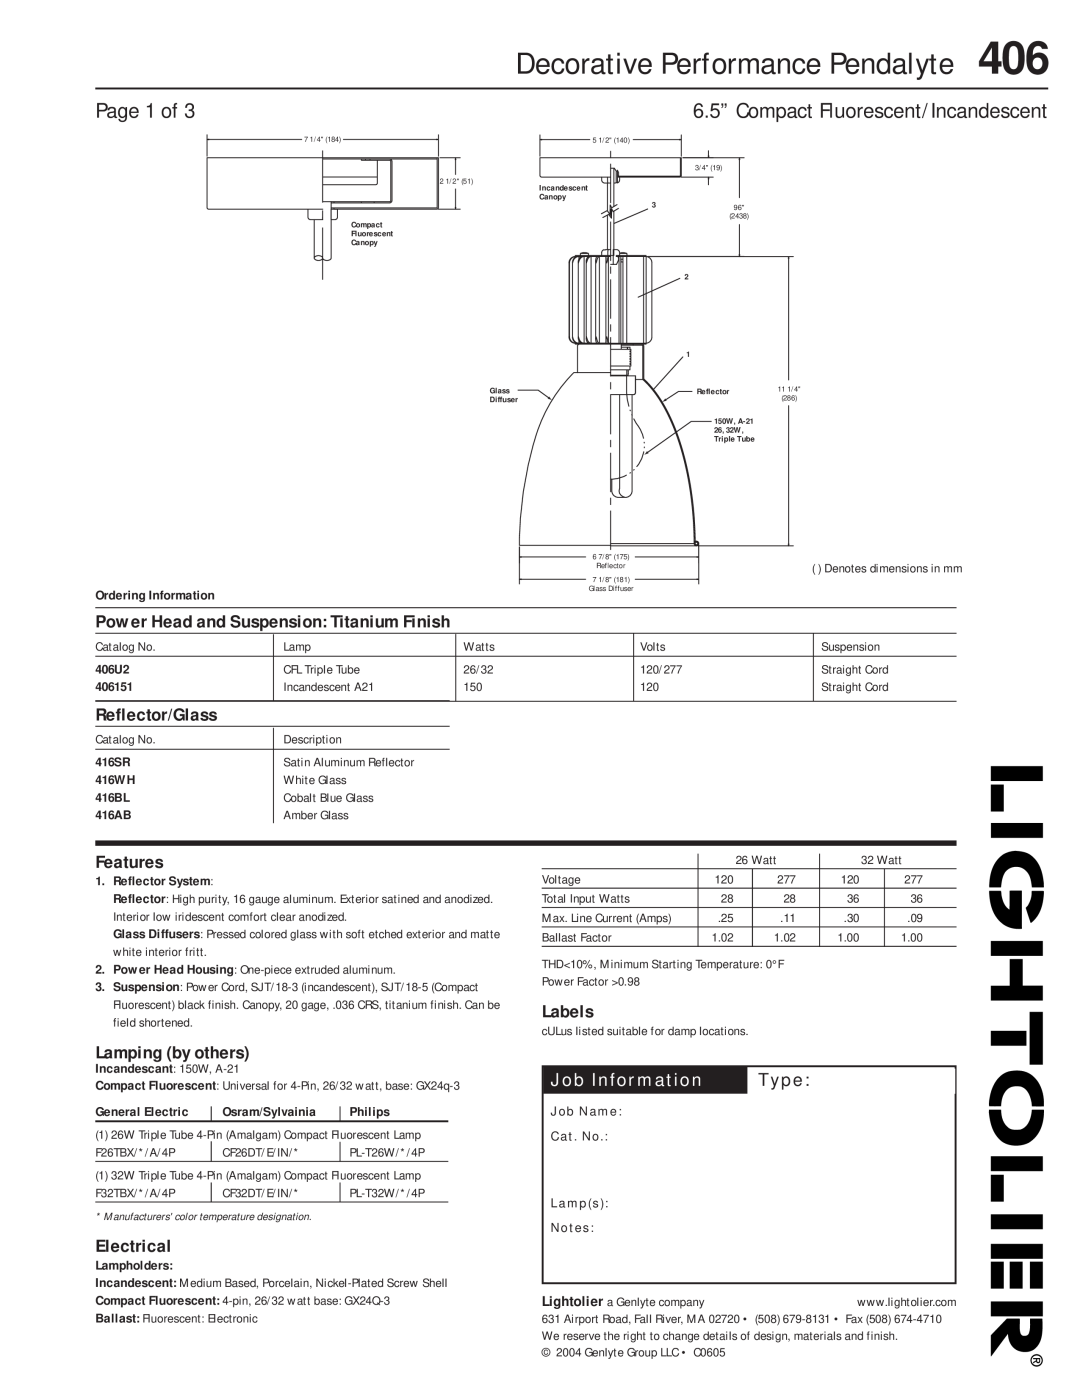 Lightolier 406 dimensions Decorative Performance Pendalyte, Page 1 of, 6.5” Compact Fluorescent/Incandescent, Features 